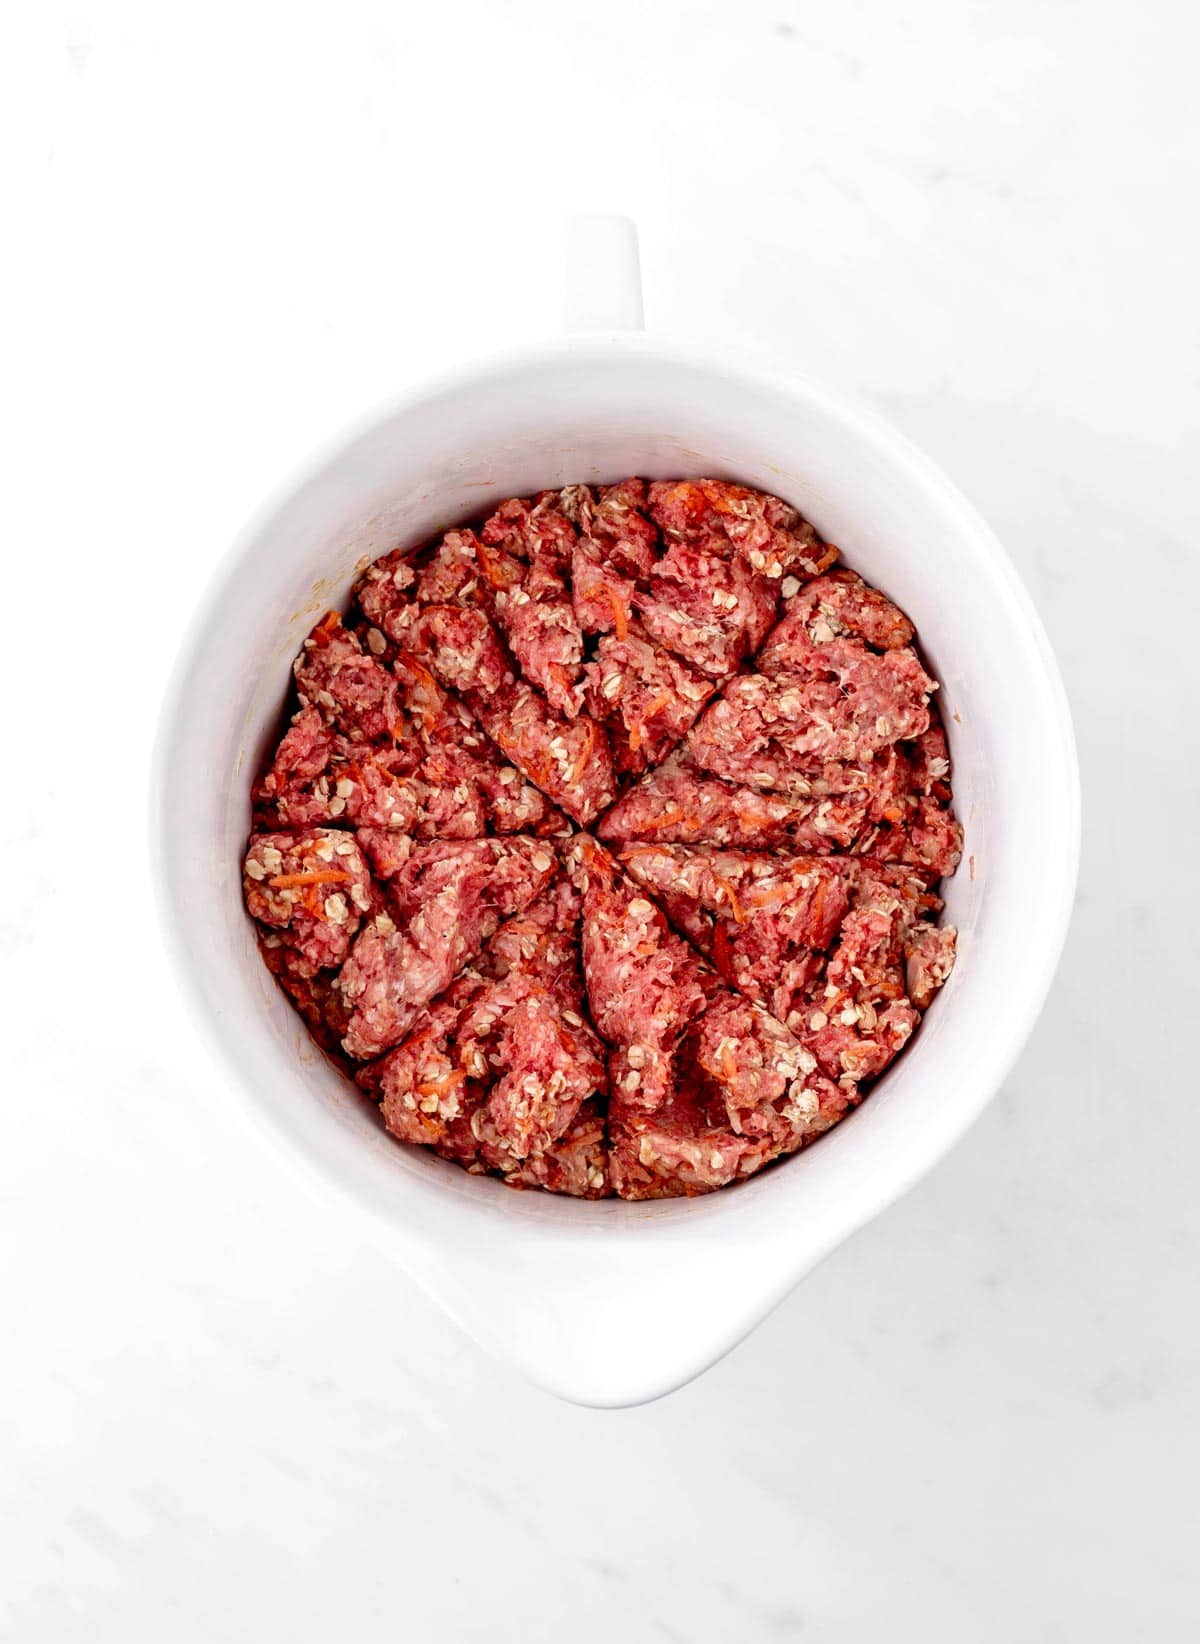 Meatloaf mixture in a bowl divided into eight sections to make mini meatloaf recipe.